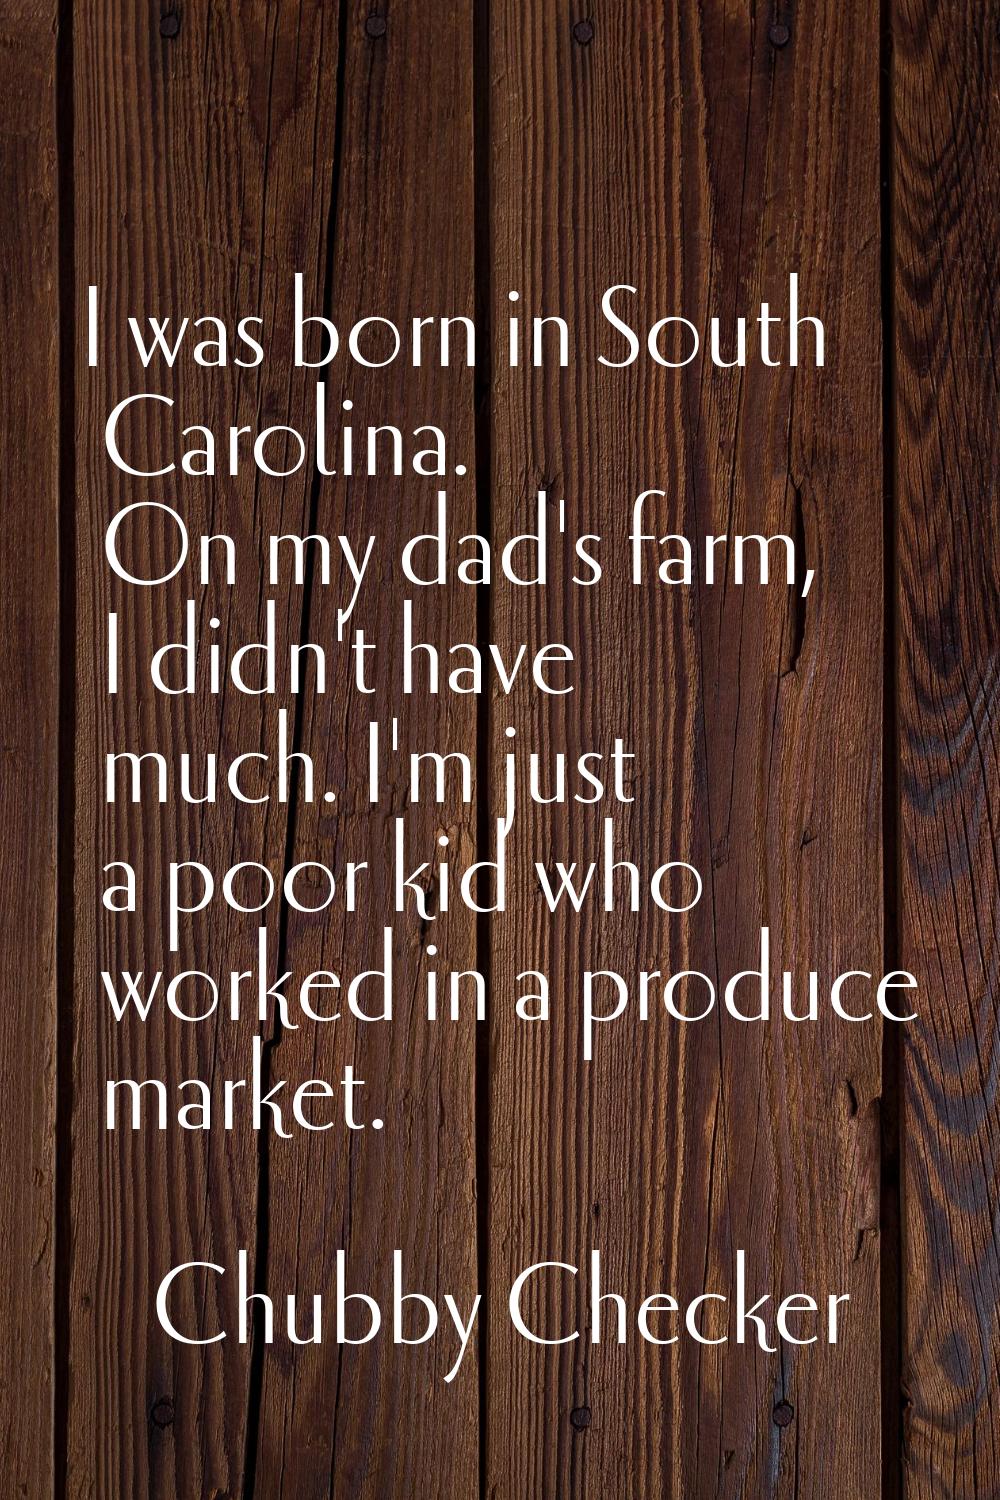 I was born in South Carolina. On my dad's farm, I didn't have much. I'm just a poor kid who worked 